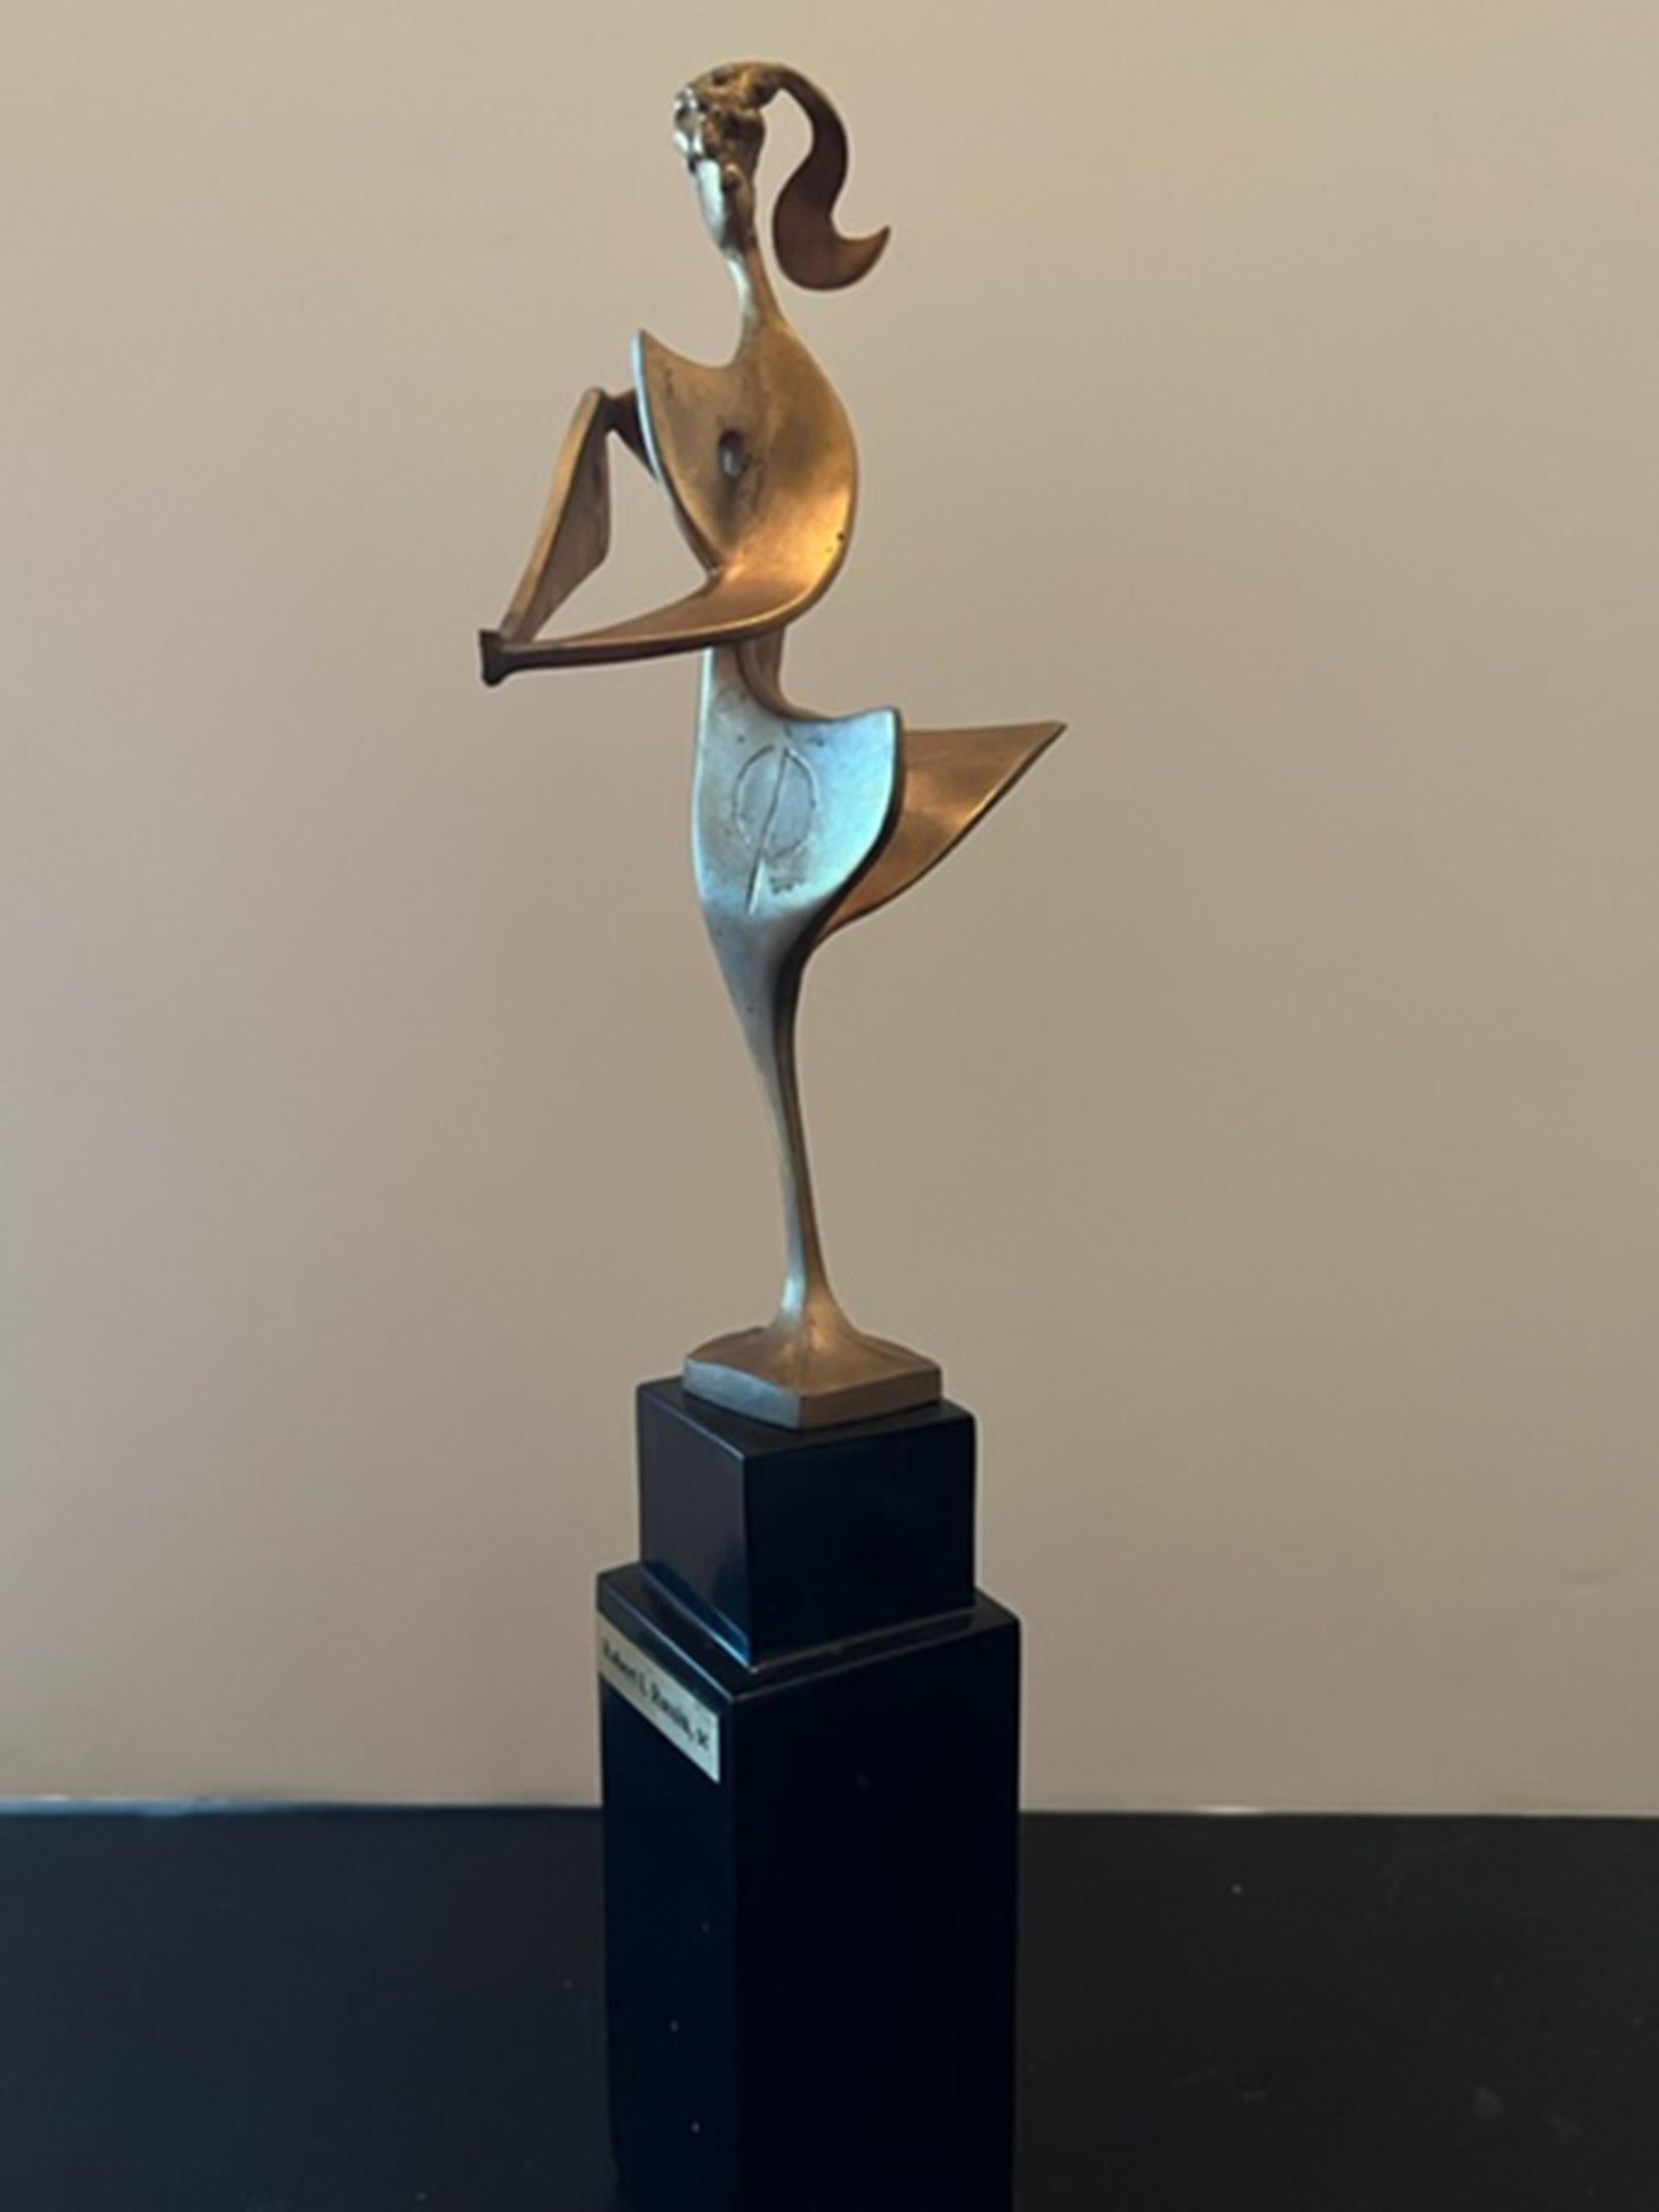 We are proud to present an original very early bronze, (1958) by American sculptor Robert Russin.

Robert Russin began his career as a WPA sculptor, and received dozens of commissions during his career both public and private. Russin created the